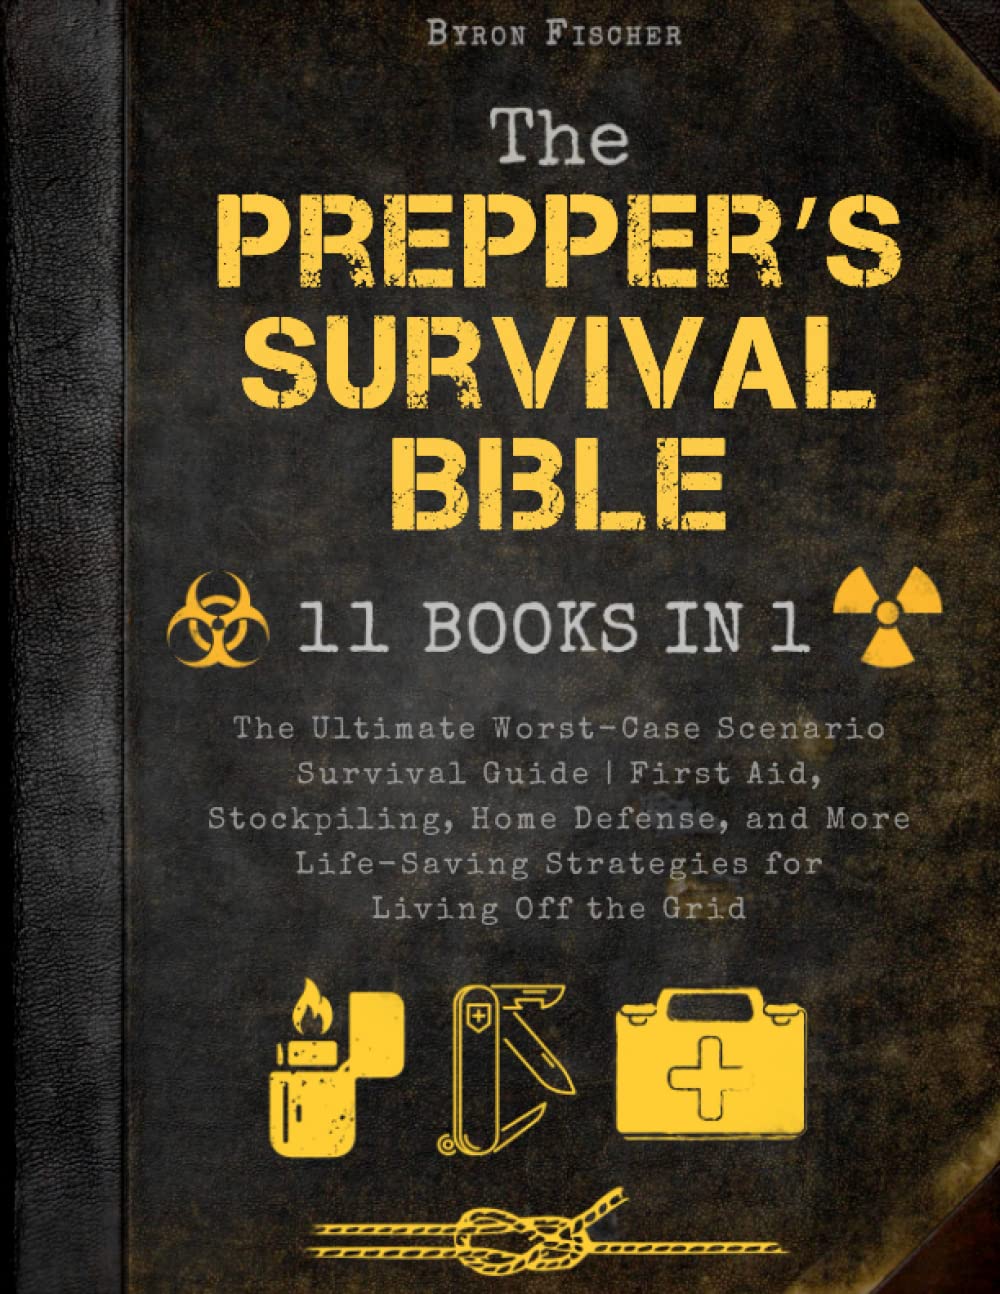 The Prepper’s Survival Bible: 11 in 1. The Ultimate Worst-Case Scenario Survival Guide | First Aid, Stockpiling, Home Defense, and More Life-Saving Strategies for Living Off the Grid